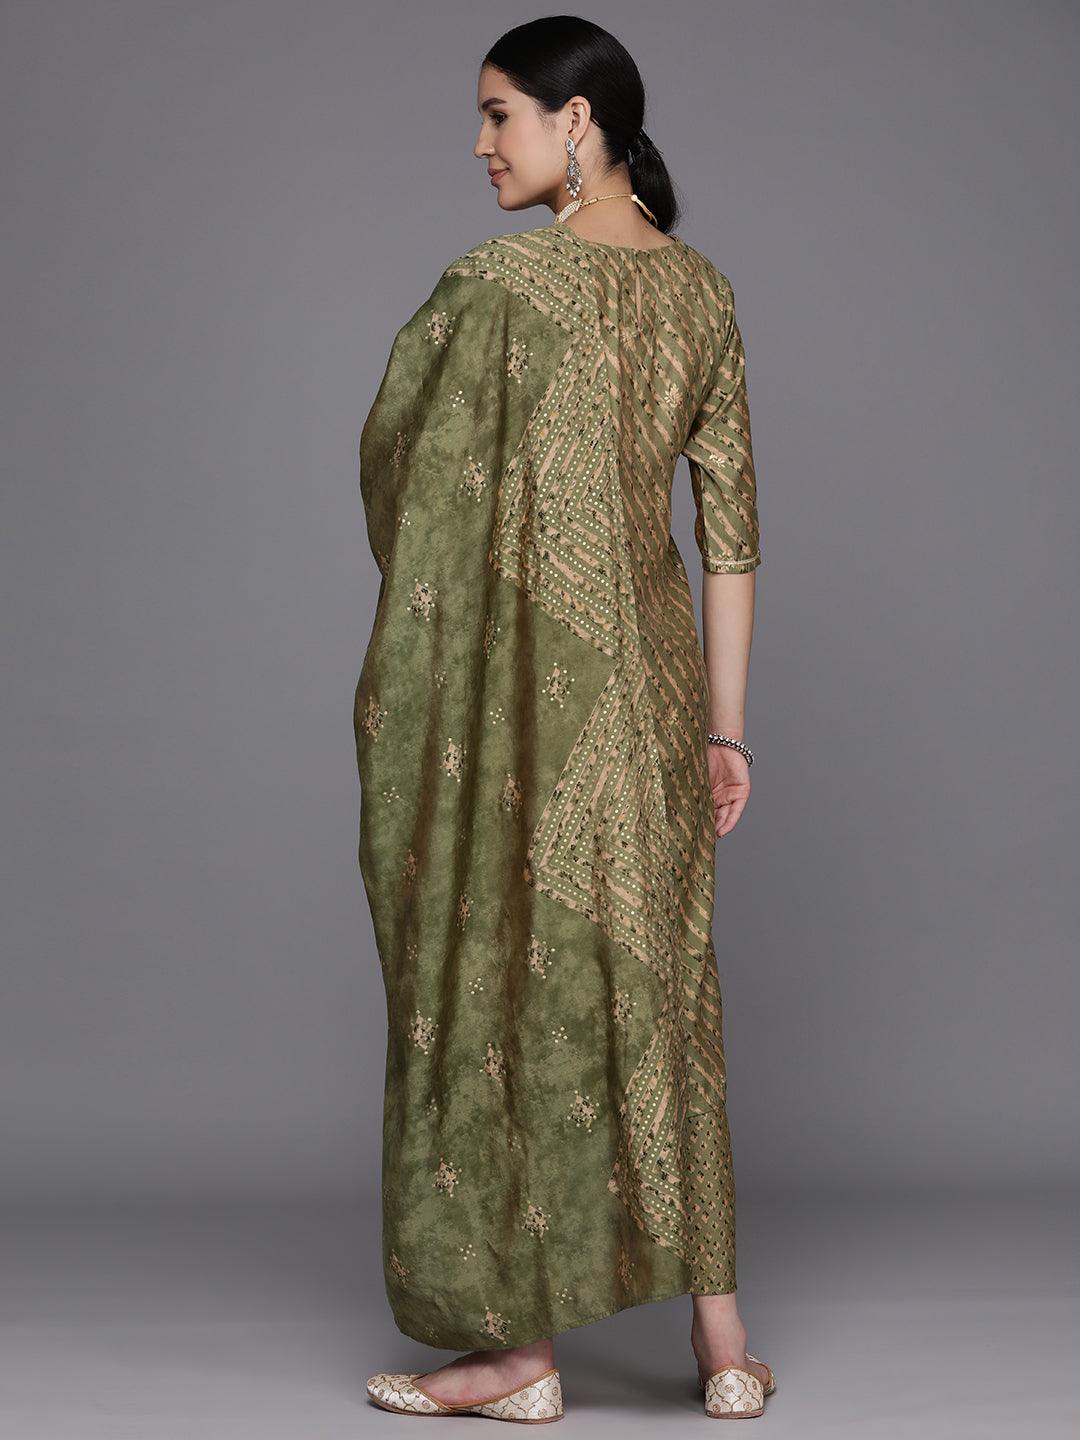 Olive Yoke Design Silk Blend Straight Suit Set With Trousers - Libas